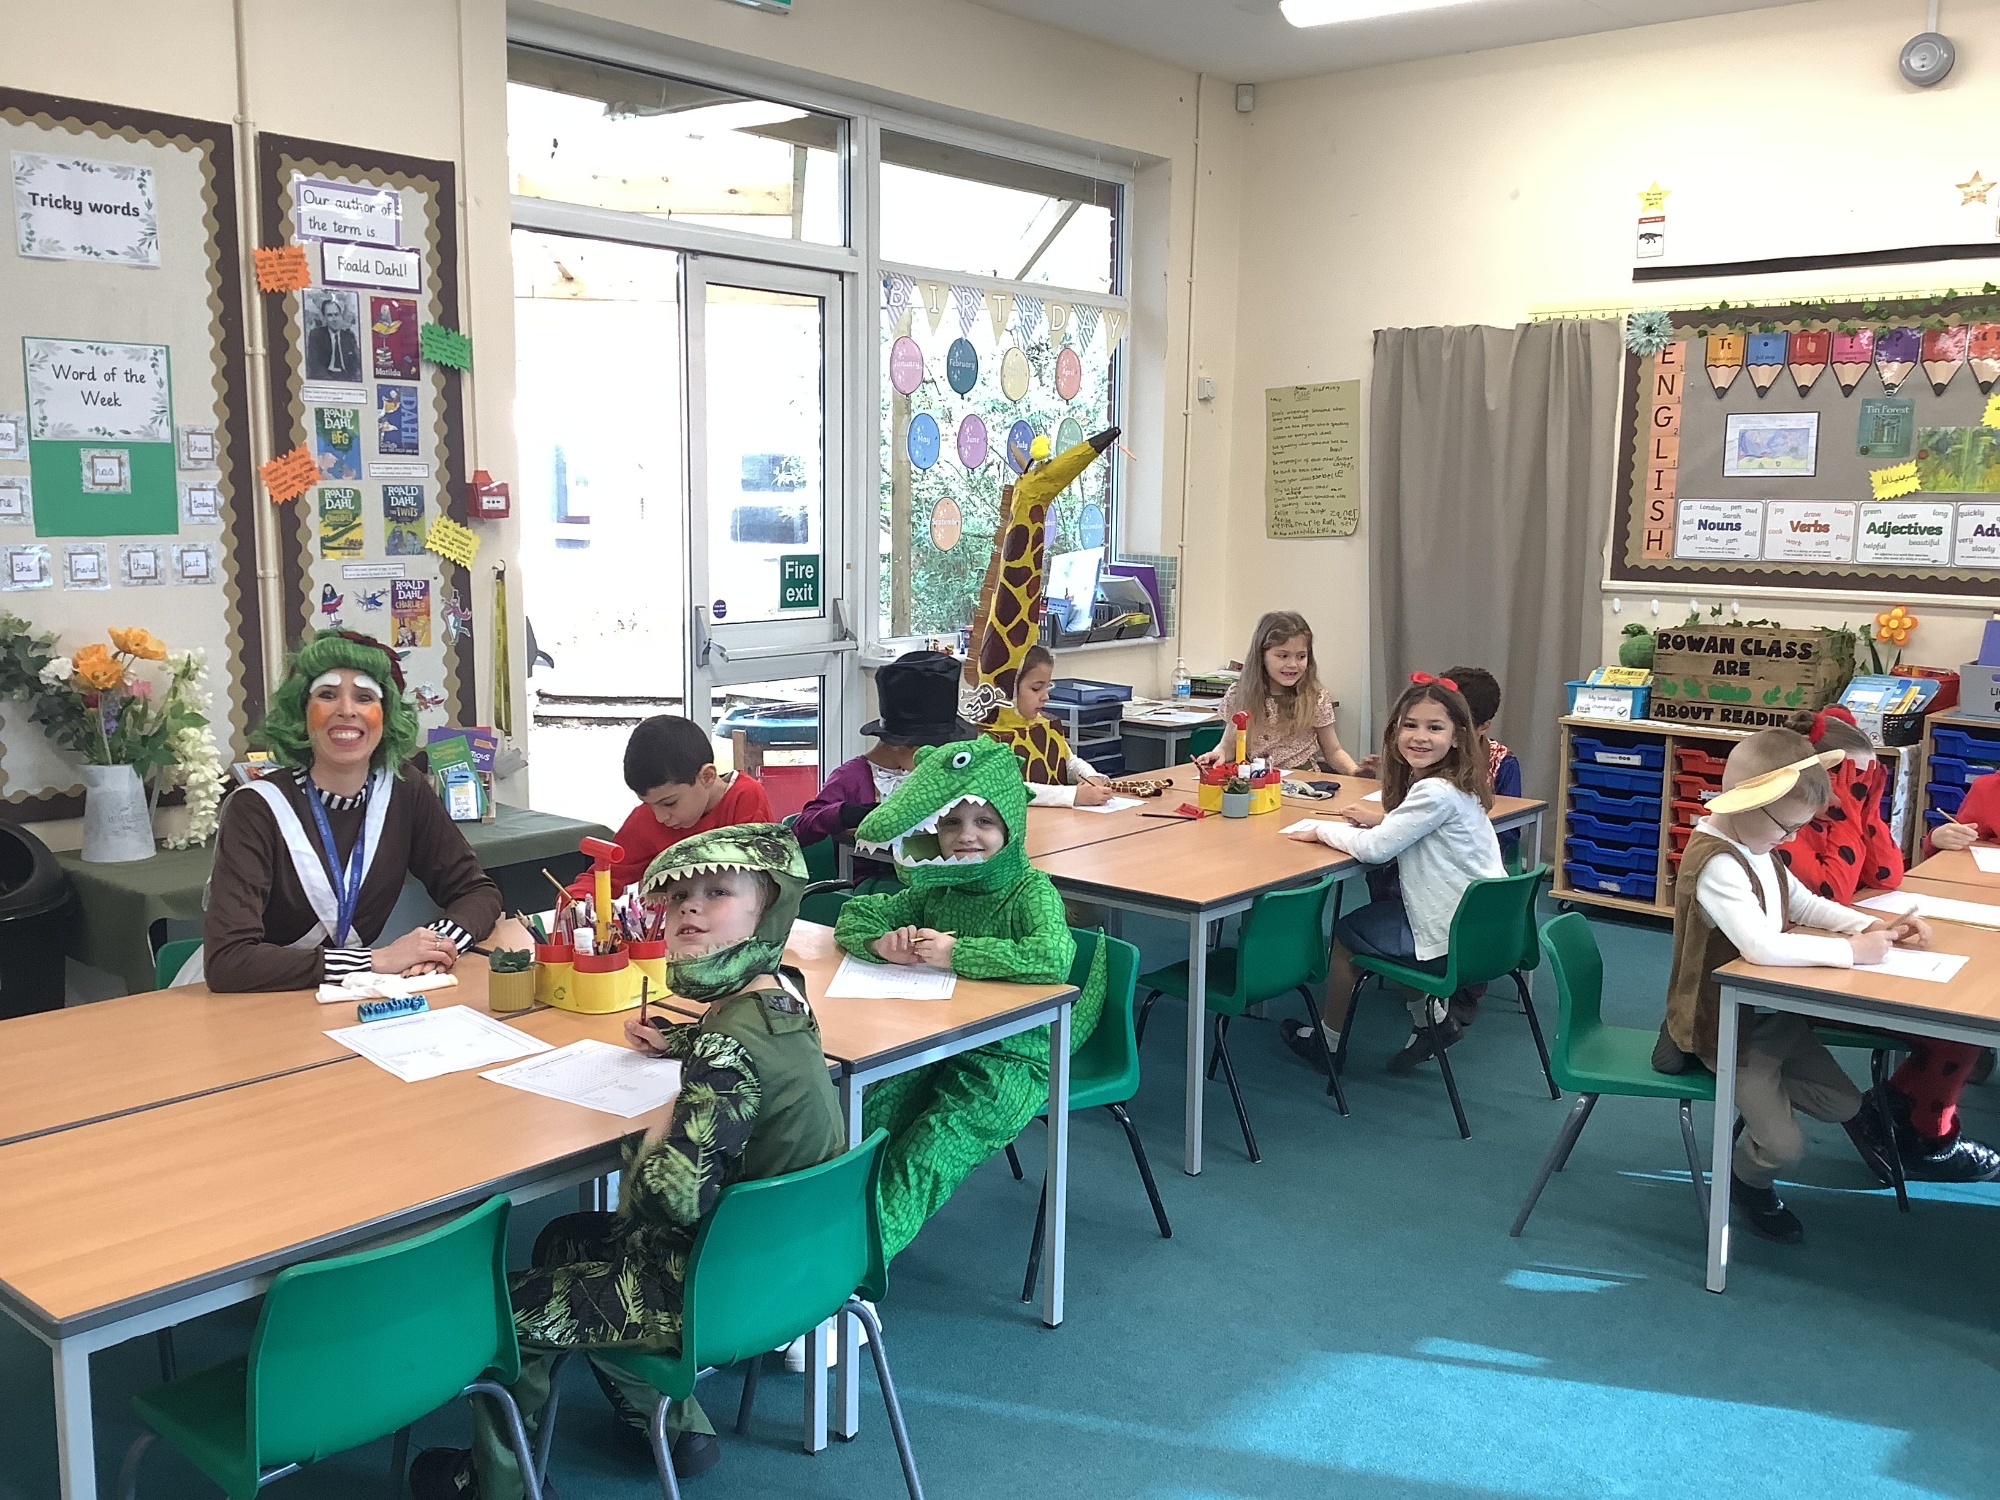 Year 2 staff and children in class dressed up as storybook characters for world book day 24